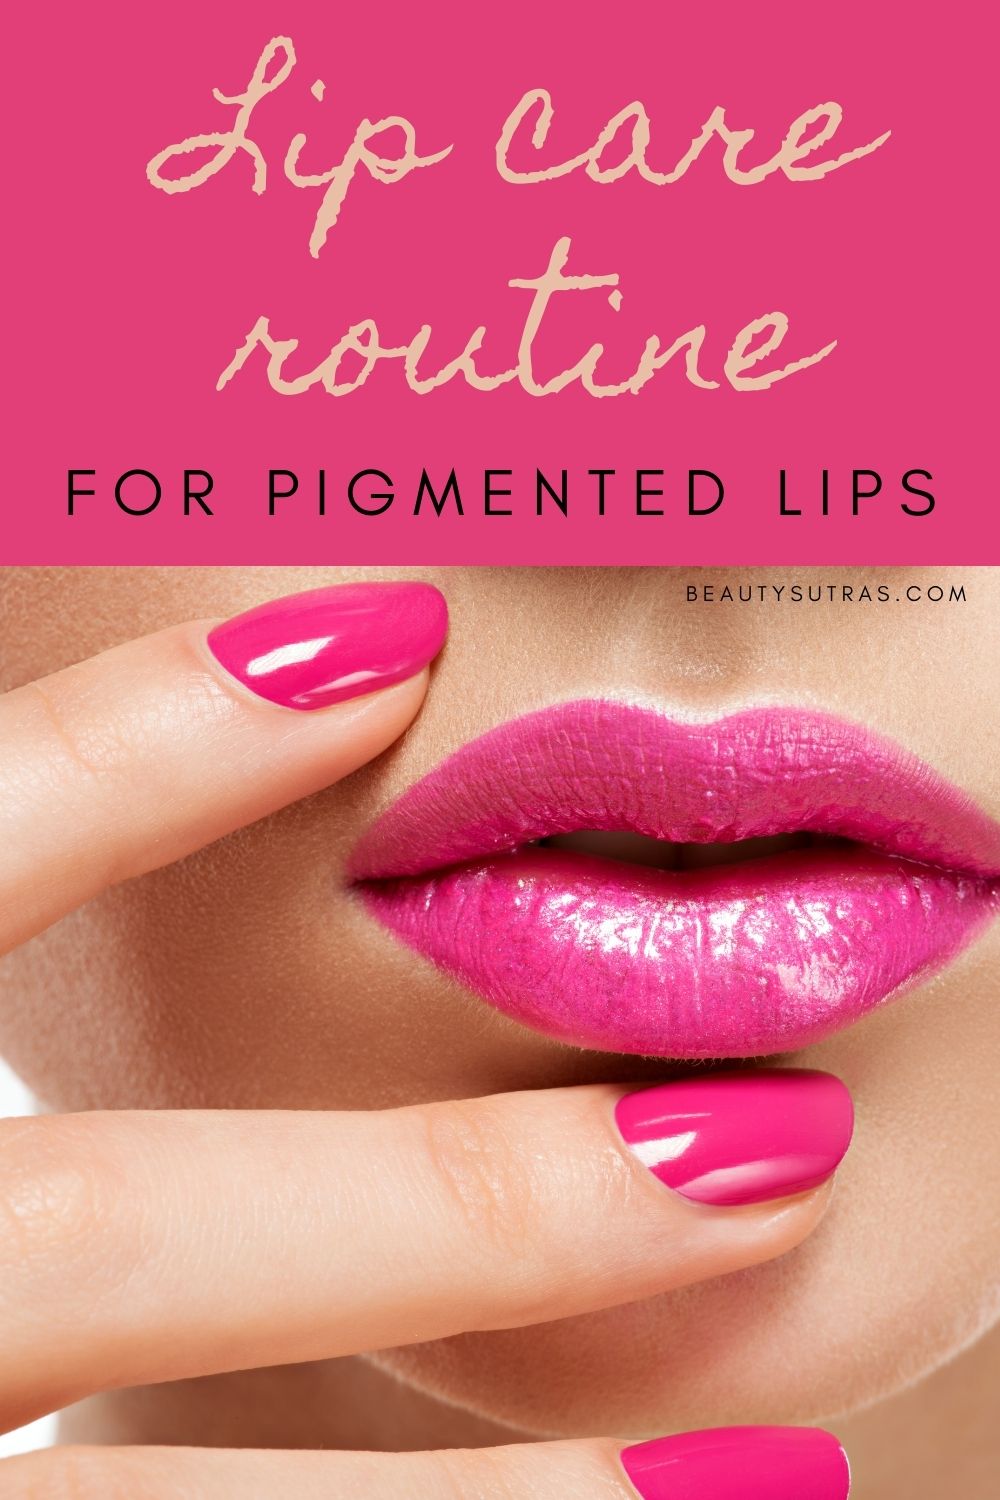 how-to-get-rid-of-pigmented-lips-lip-care-routine-beautysutras